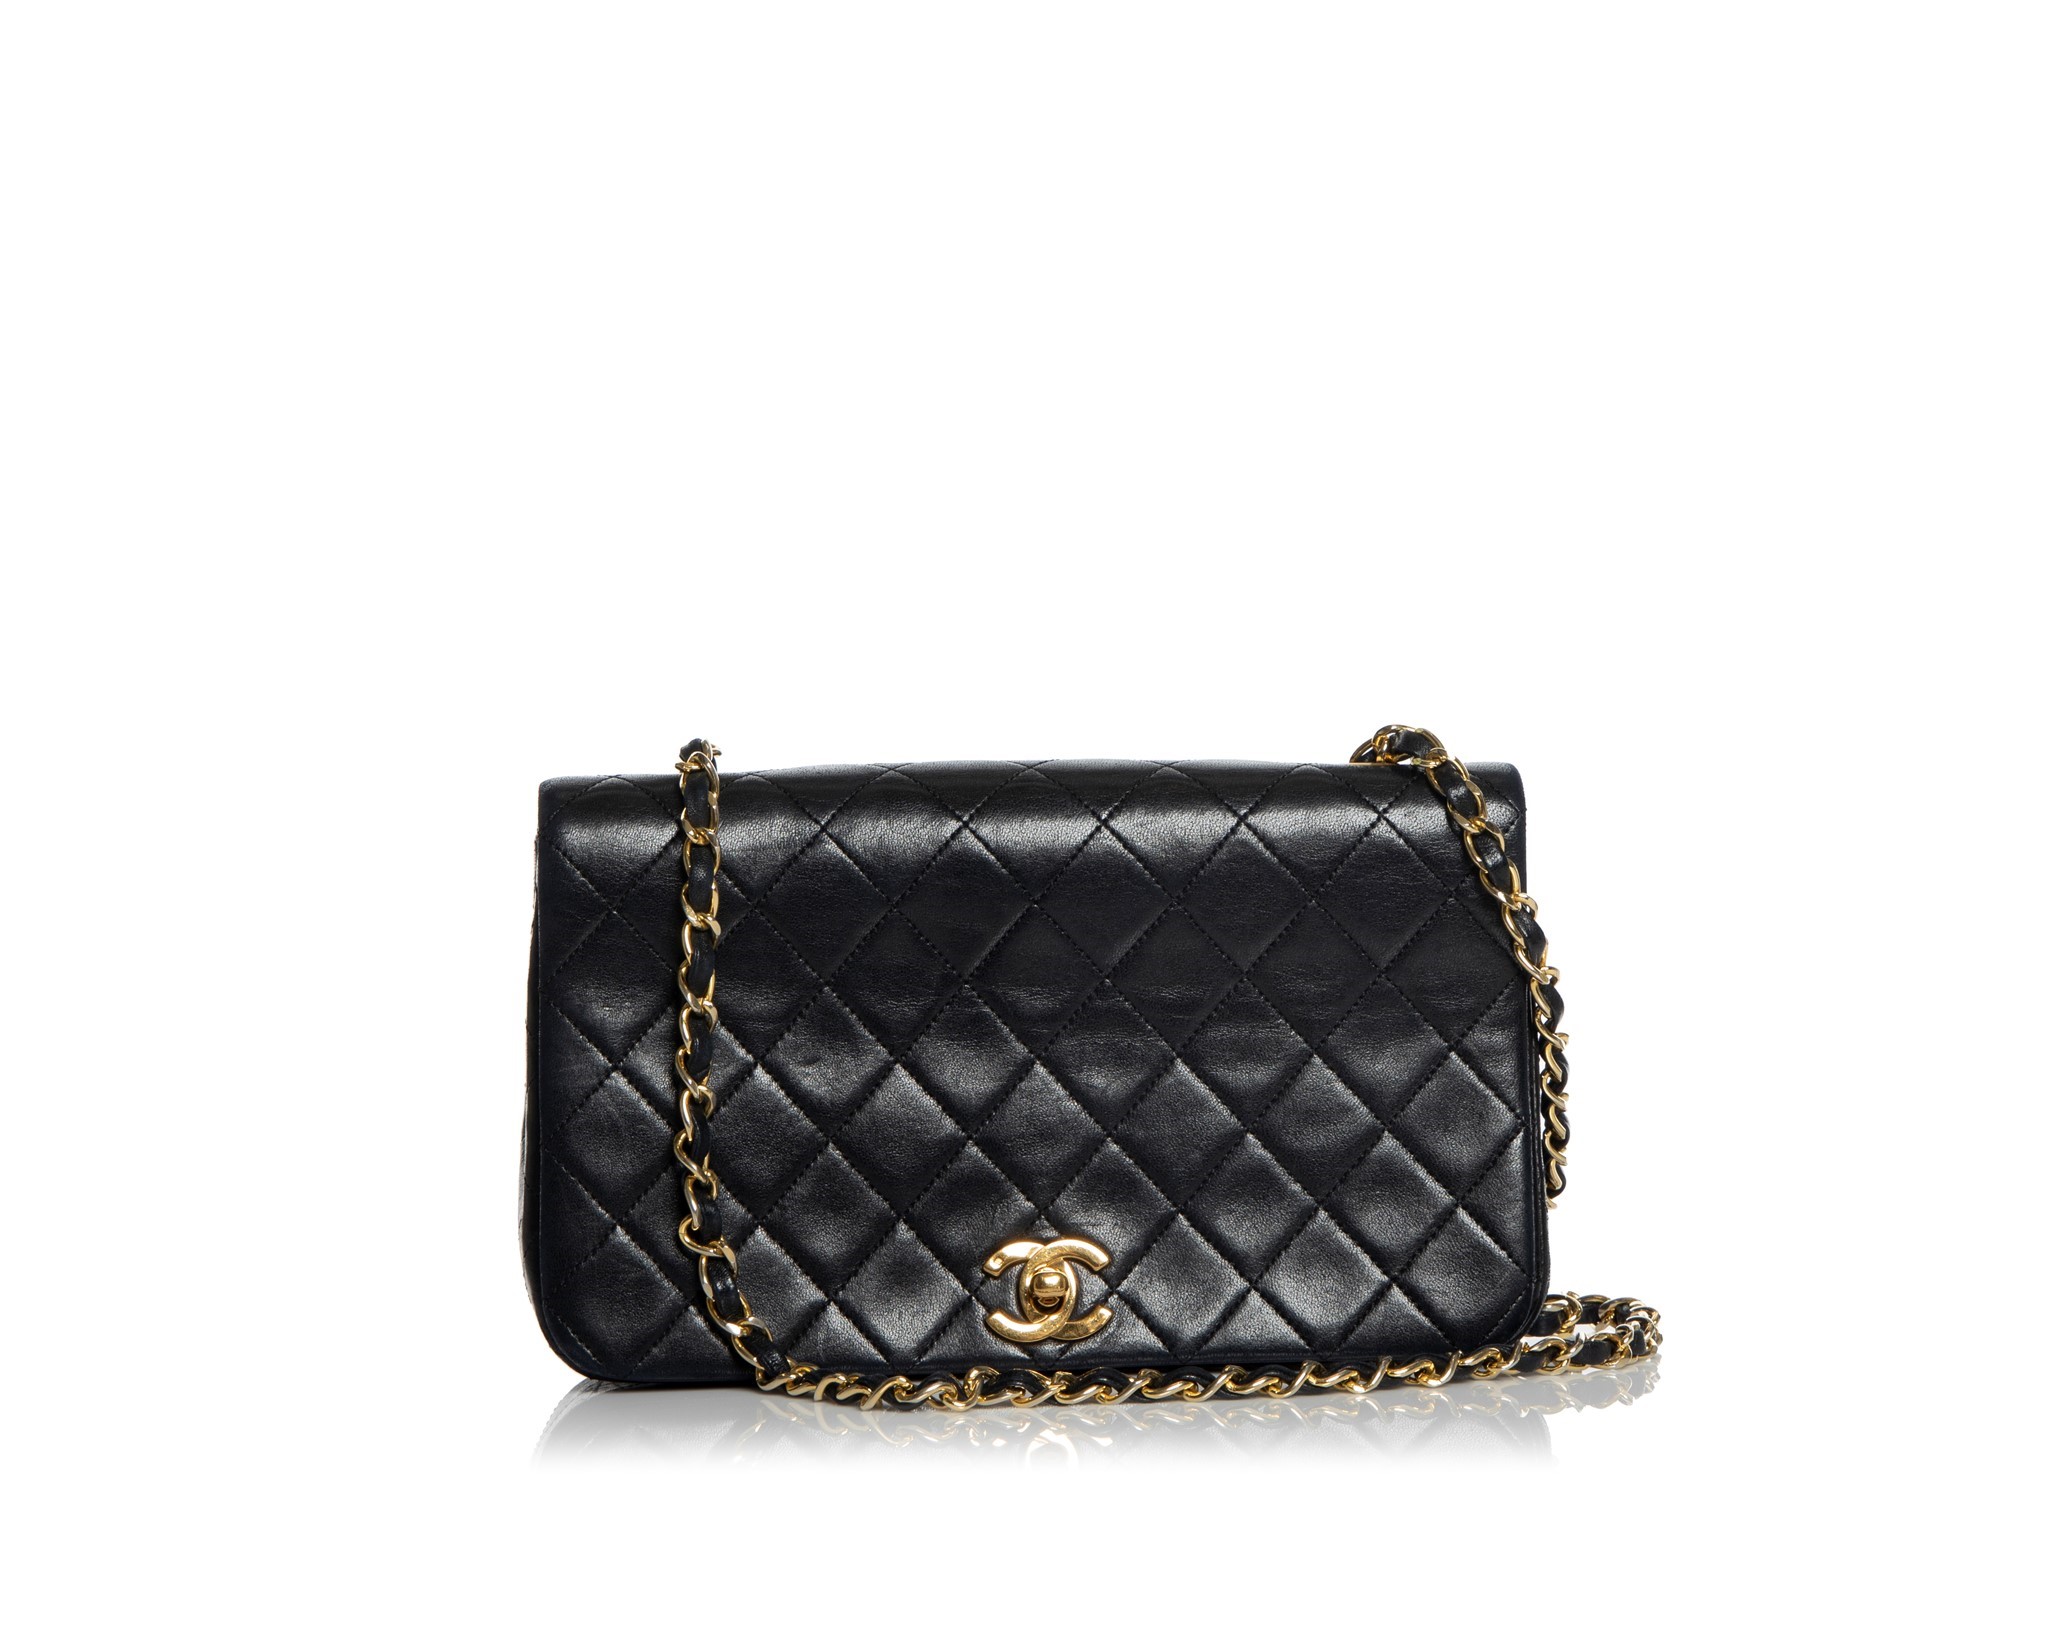 Nass boutique a multi-brand boutique curating clothing and accessoriesVINTAGE CHANEL BLACK QUILTED FLAP BAG